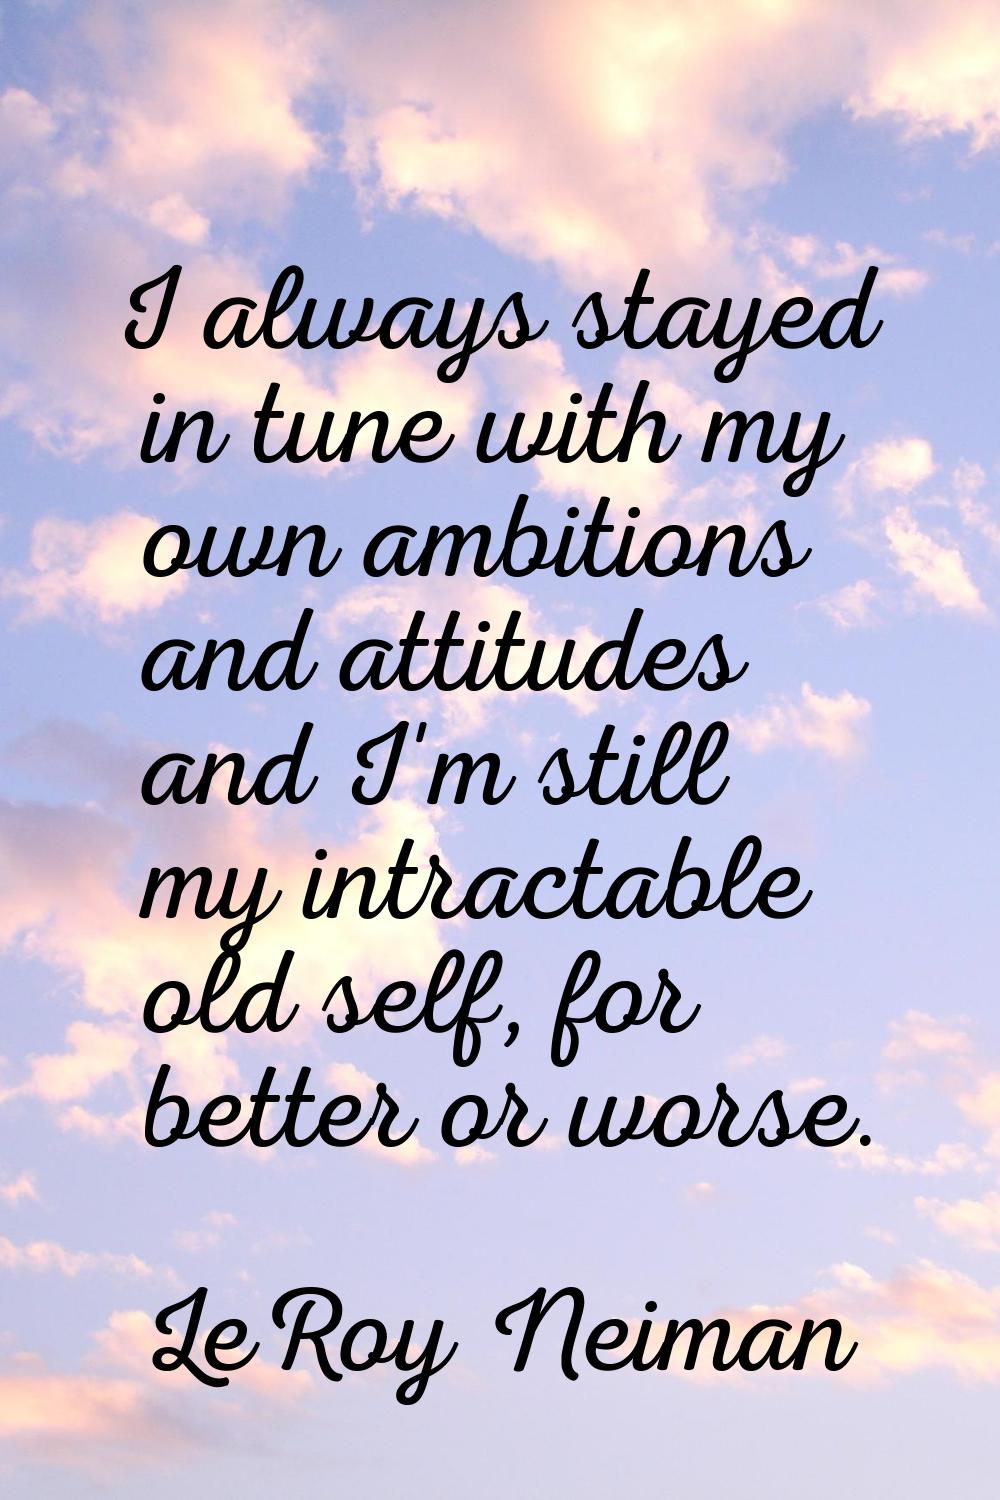 I always stayed in tune with my own ambitions and attitudes and I'm still my intractable old self, 